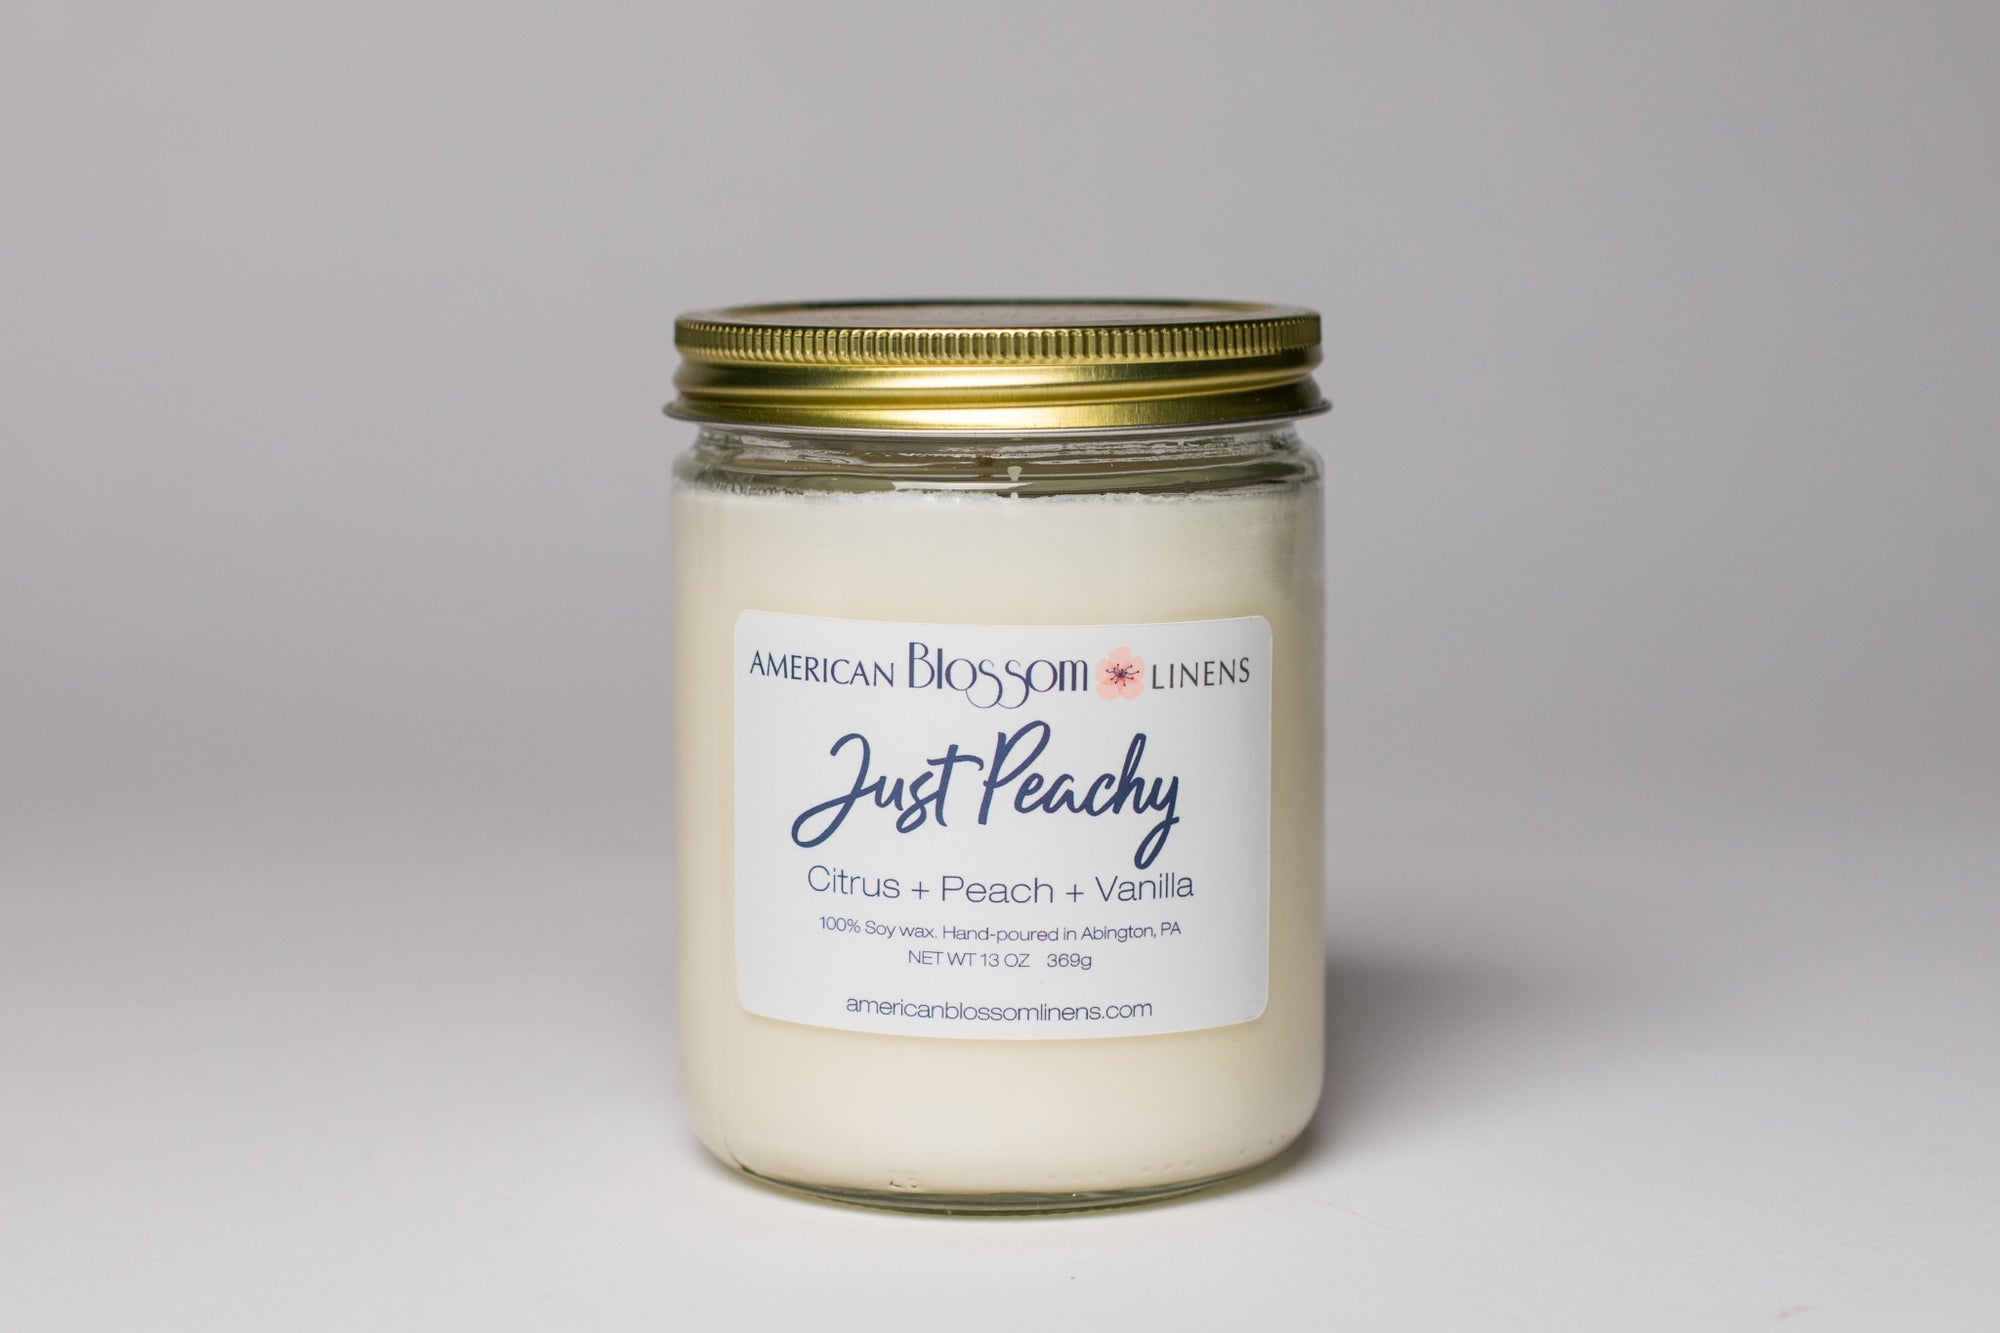 Burning American Blossom Linens Just Peachy Candle 100% Soy hand poured in the USA.